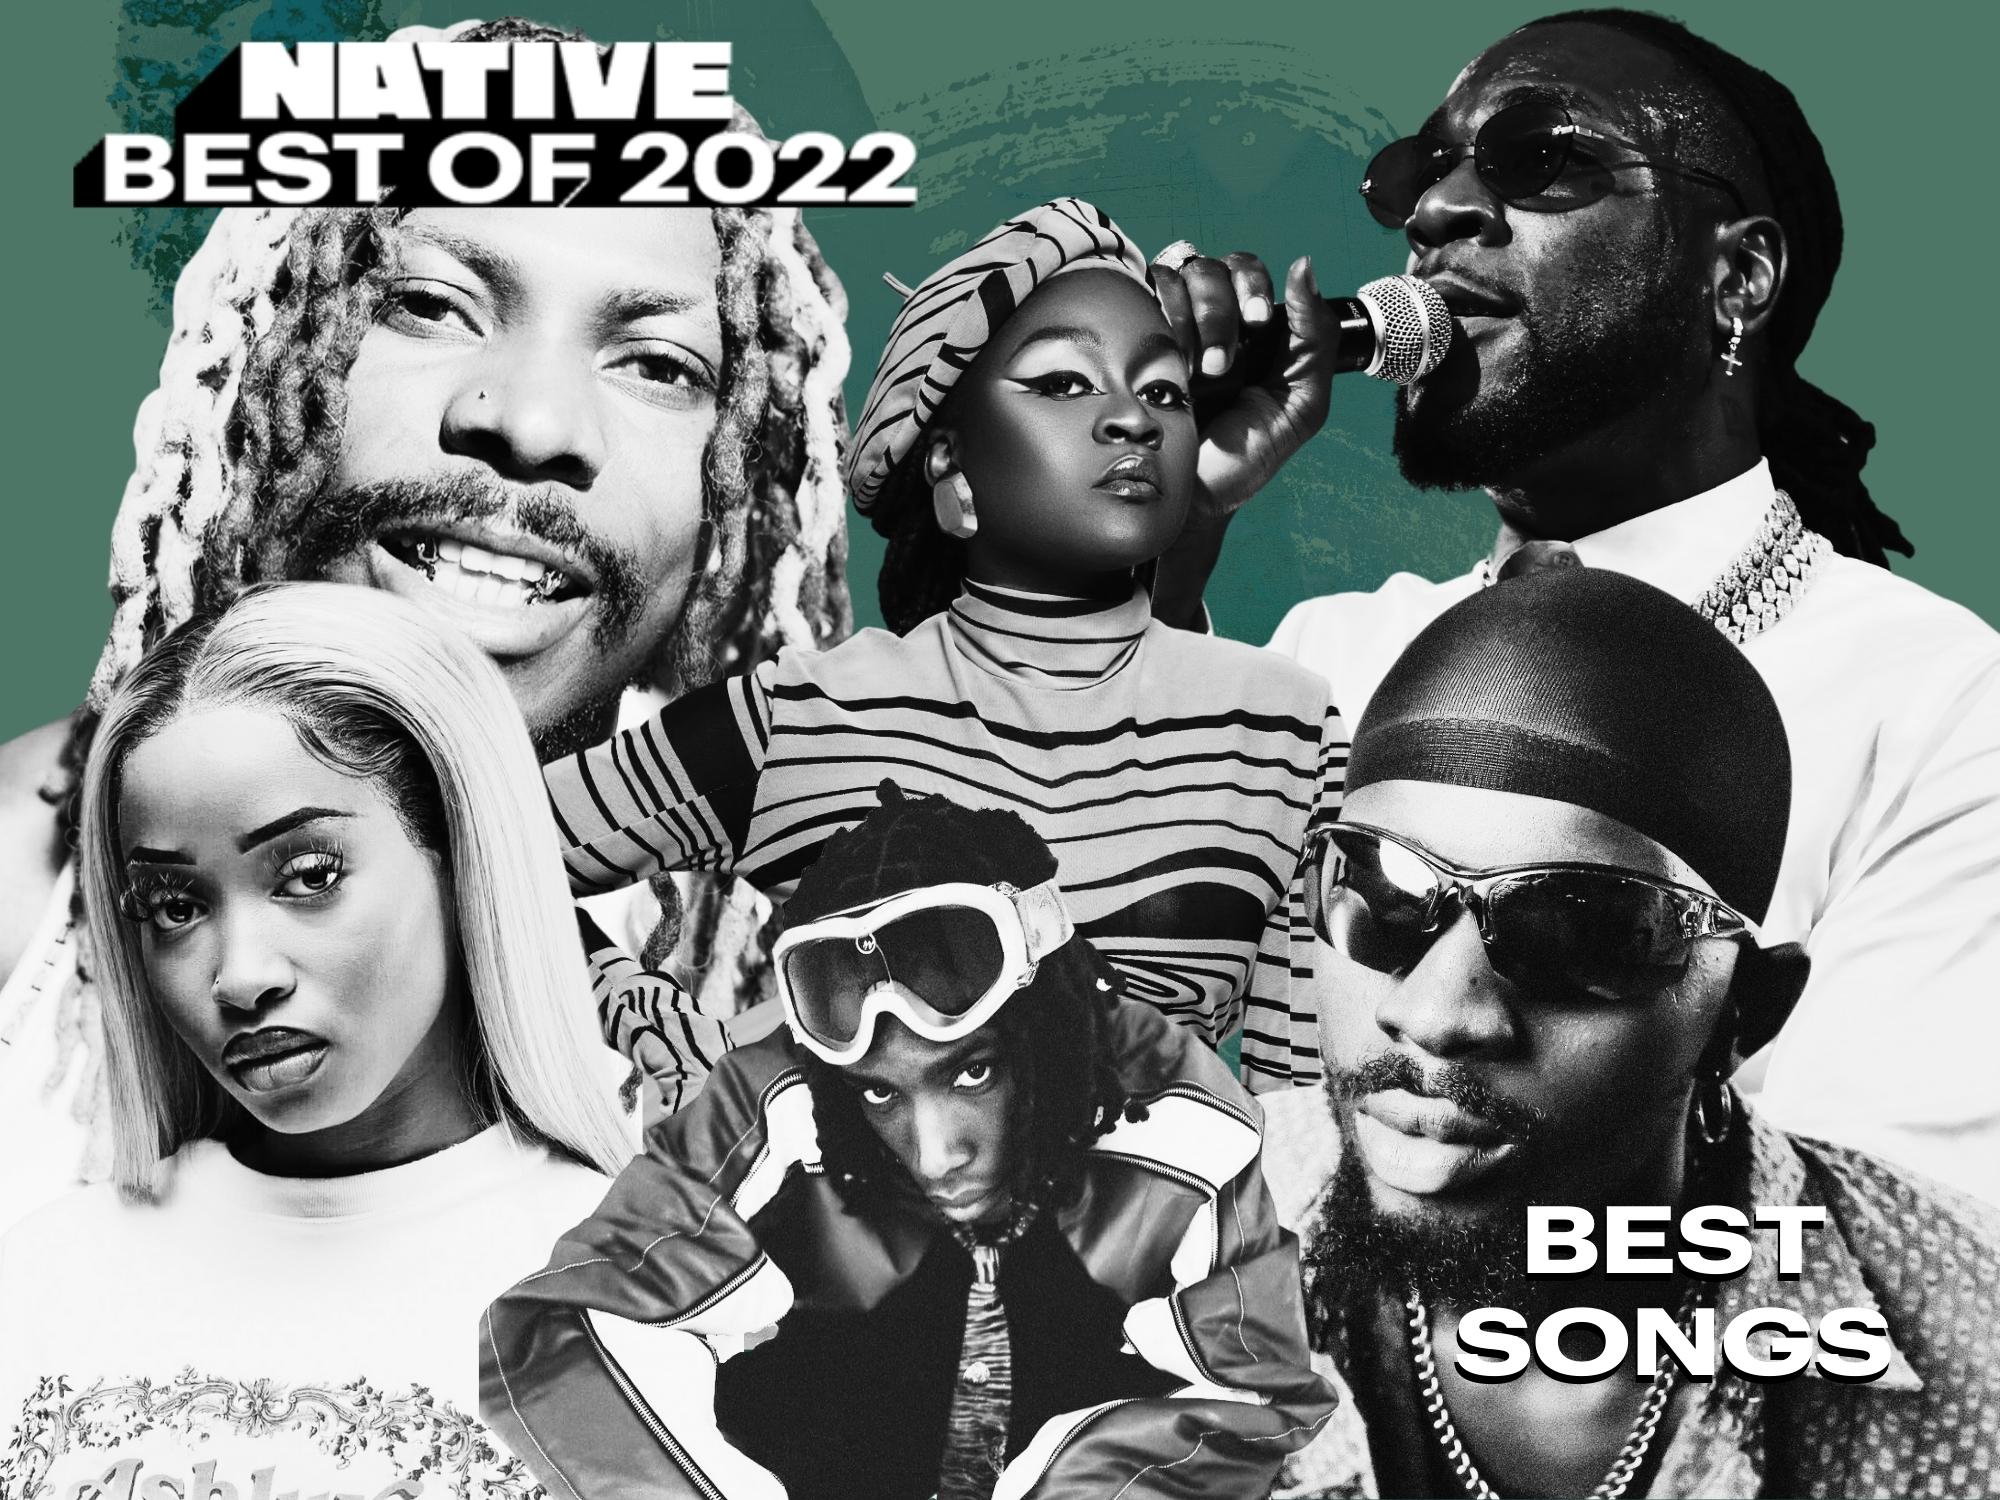 NATIVE Staff Picks: 20 Songs That Defined Afropop In 2022